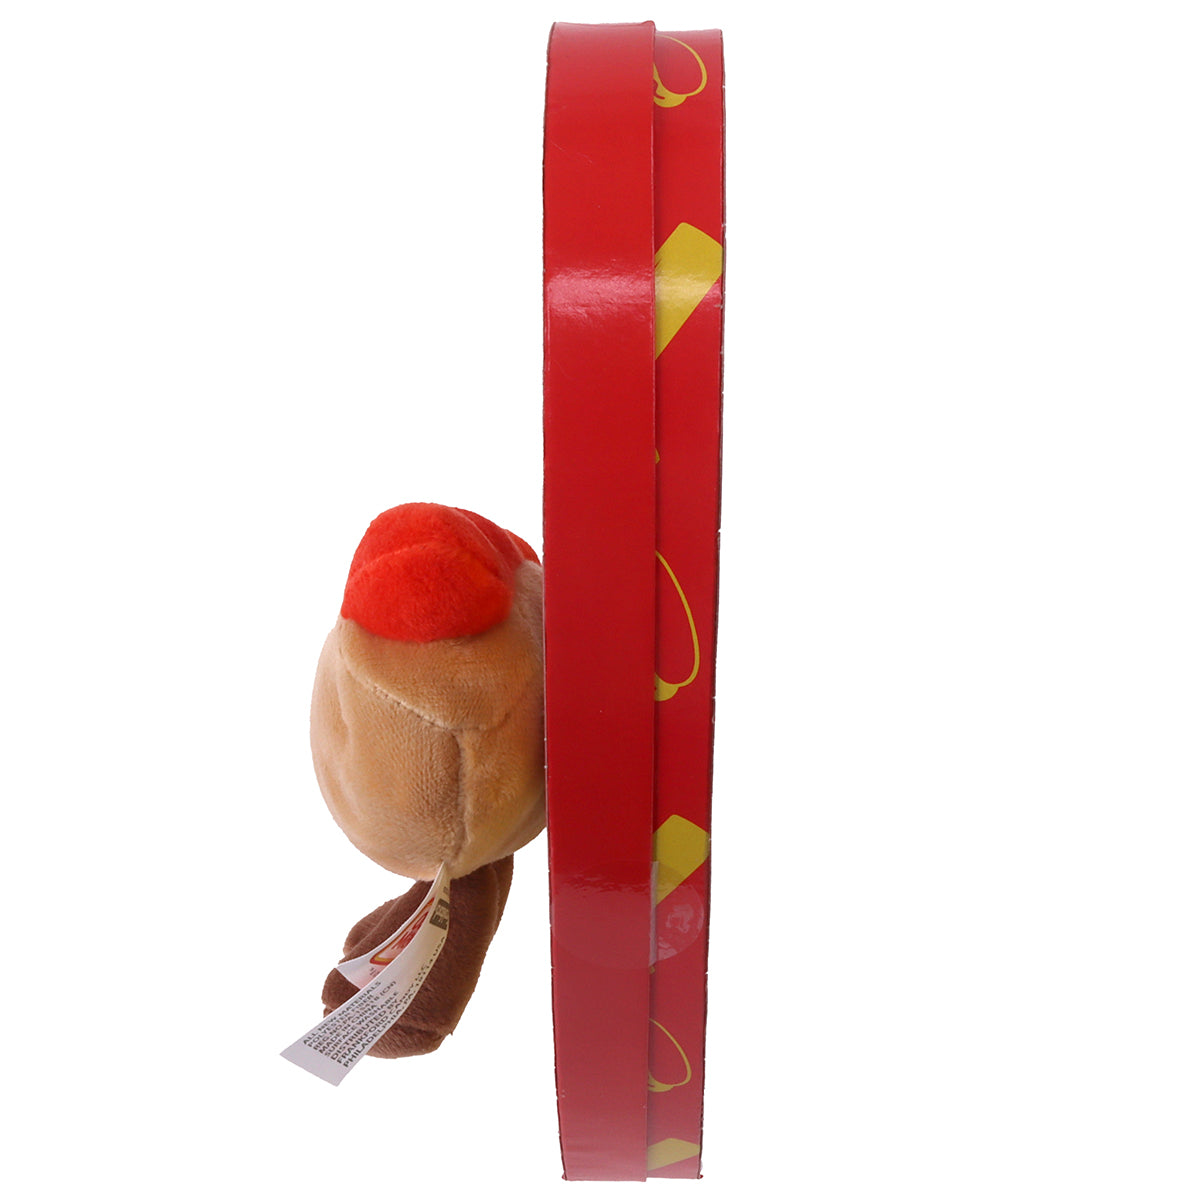 side view of yellow heart shaped box with red border and a hot dog plush on the front